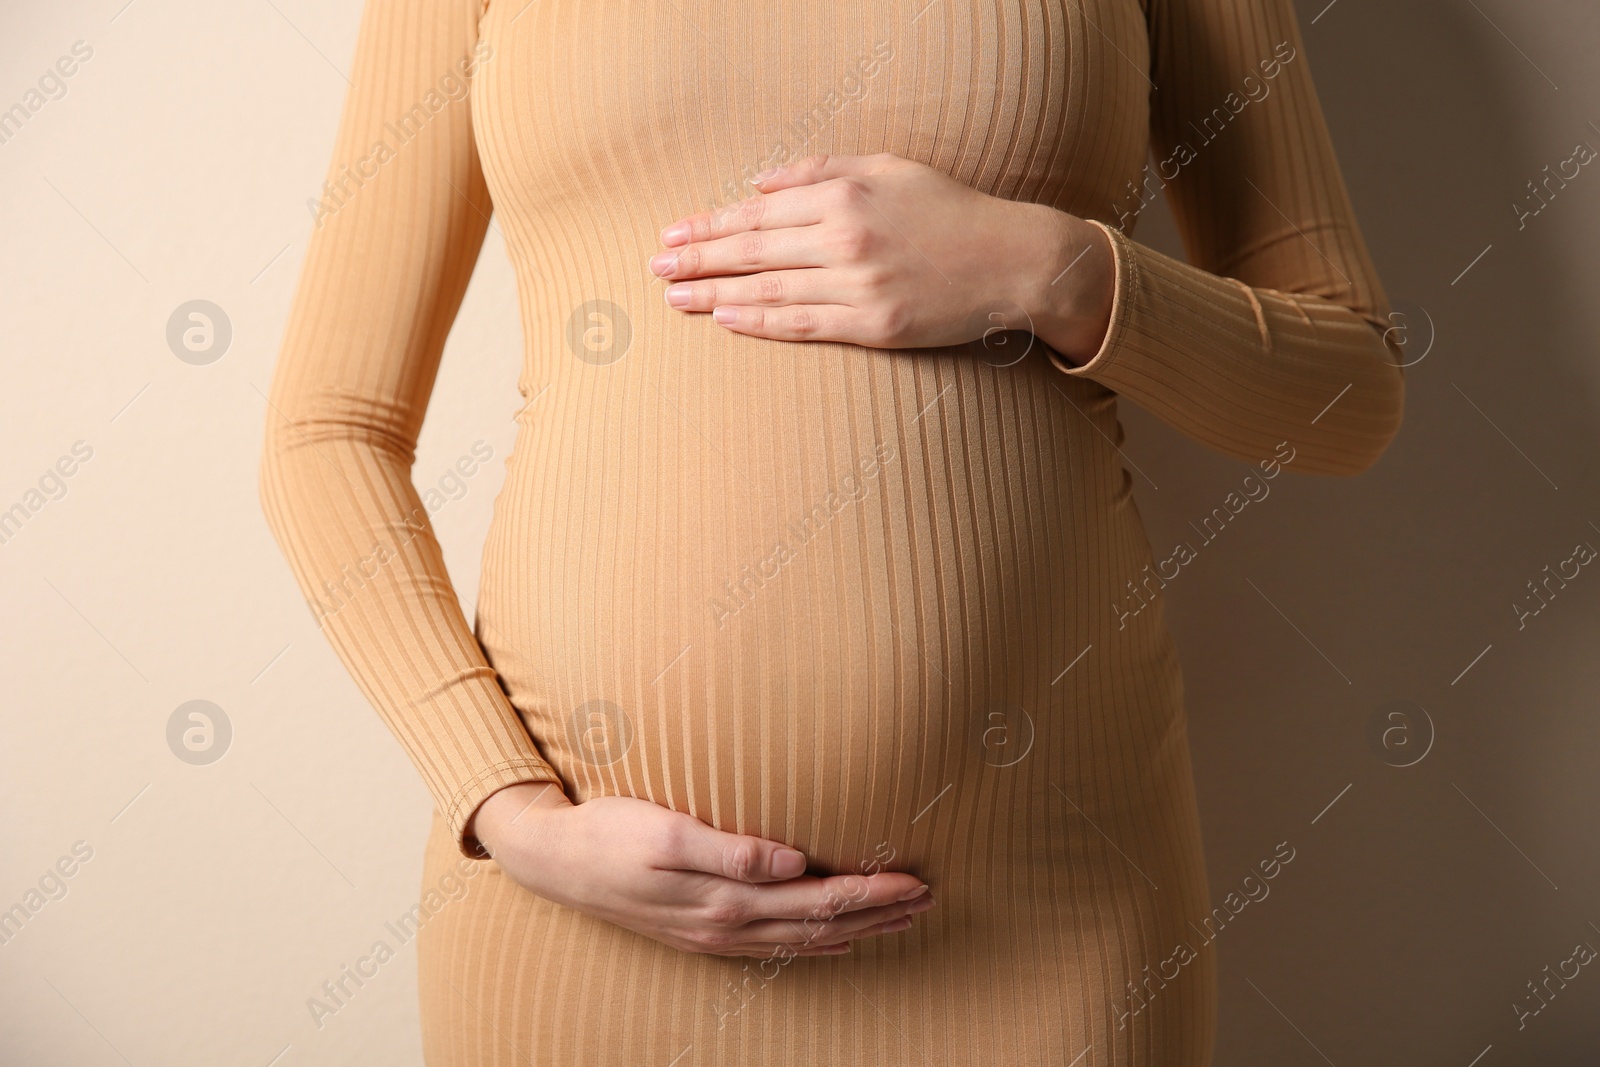 Photo of Pregnant woman touching her belly on beige background, closeup